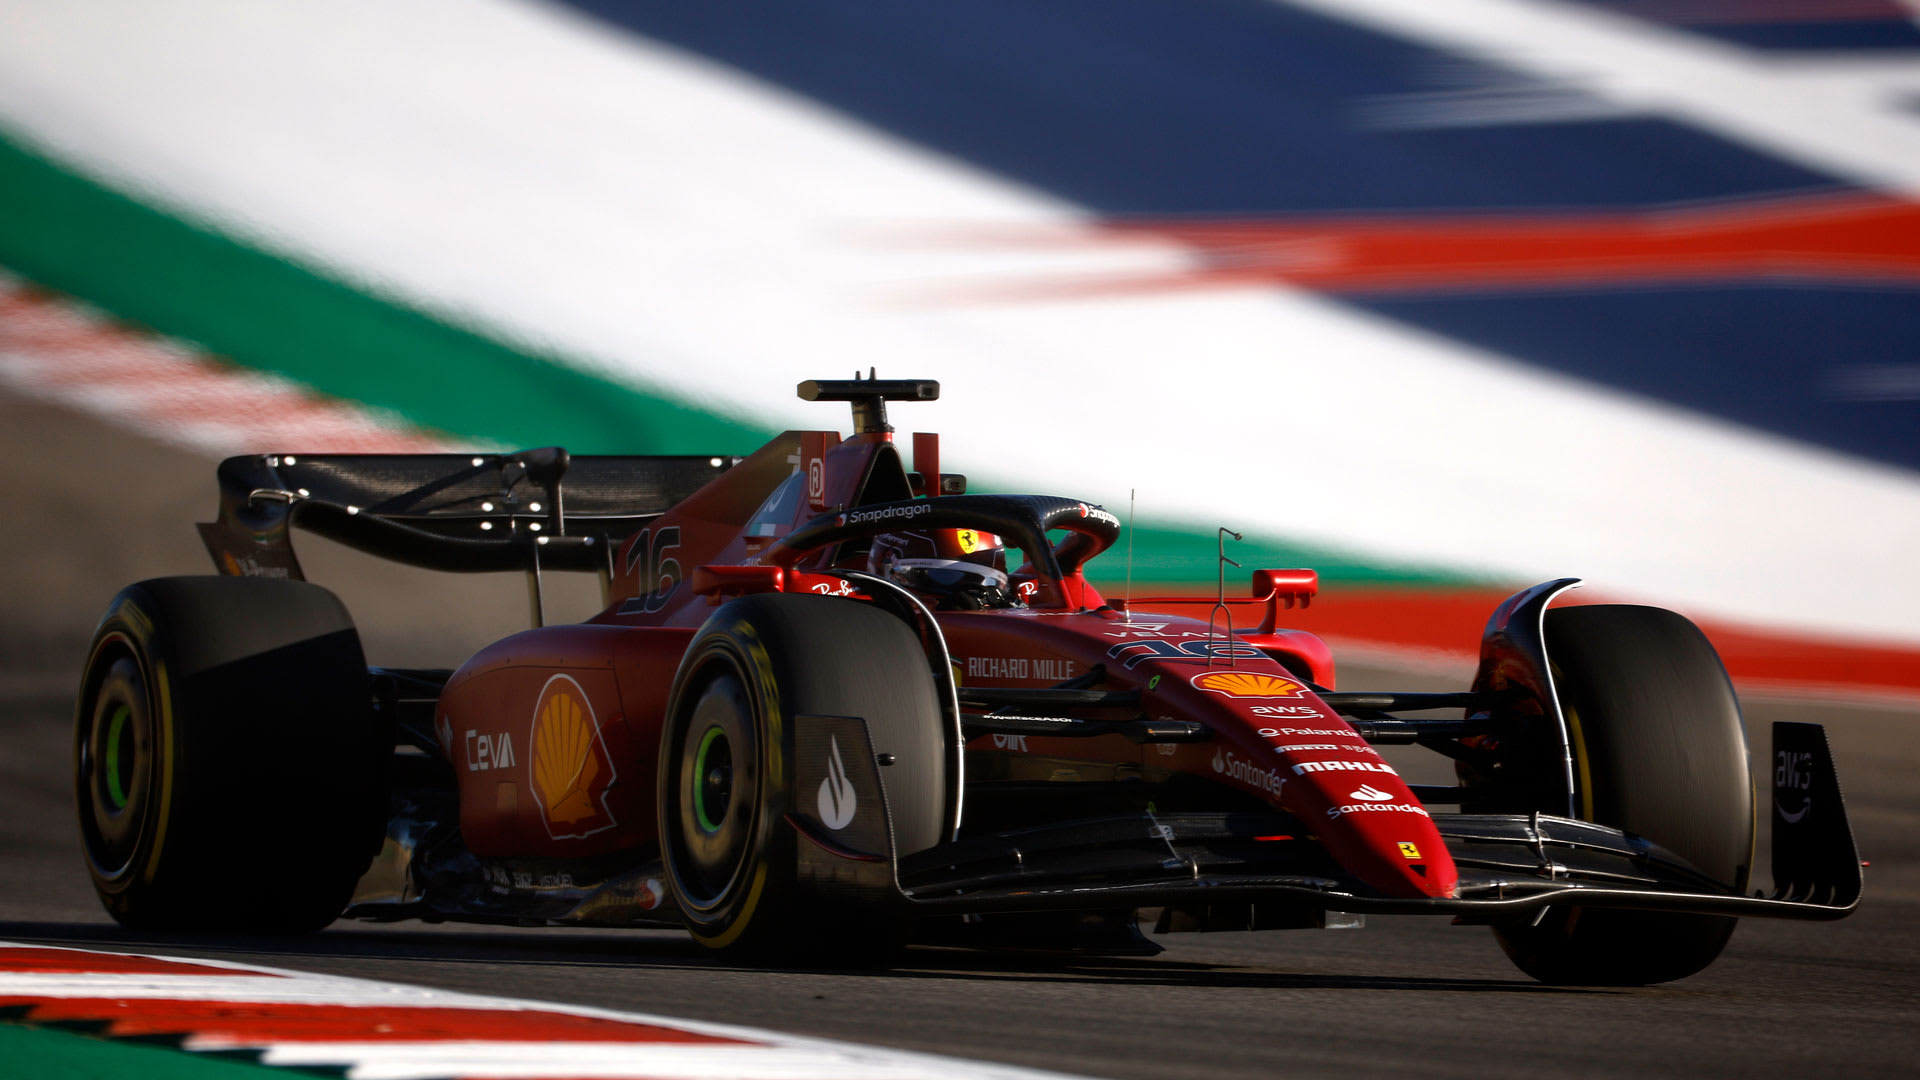 2022 United States Grand Prix FP2 report and highlights Leclerc tops extended second practice session in Austin as drivers test 2023 tyres Formula 1®